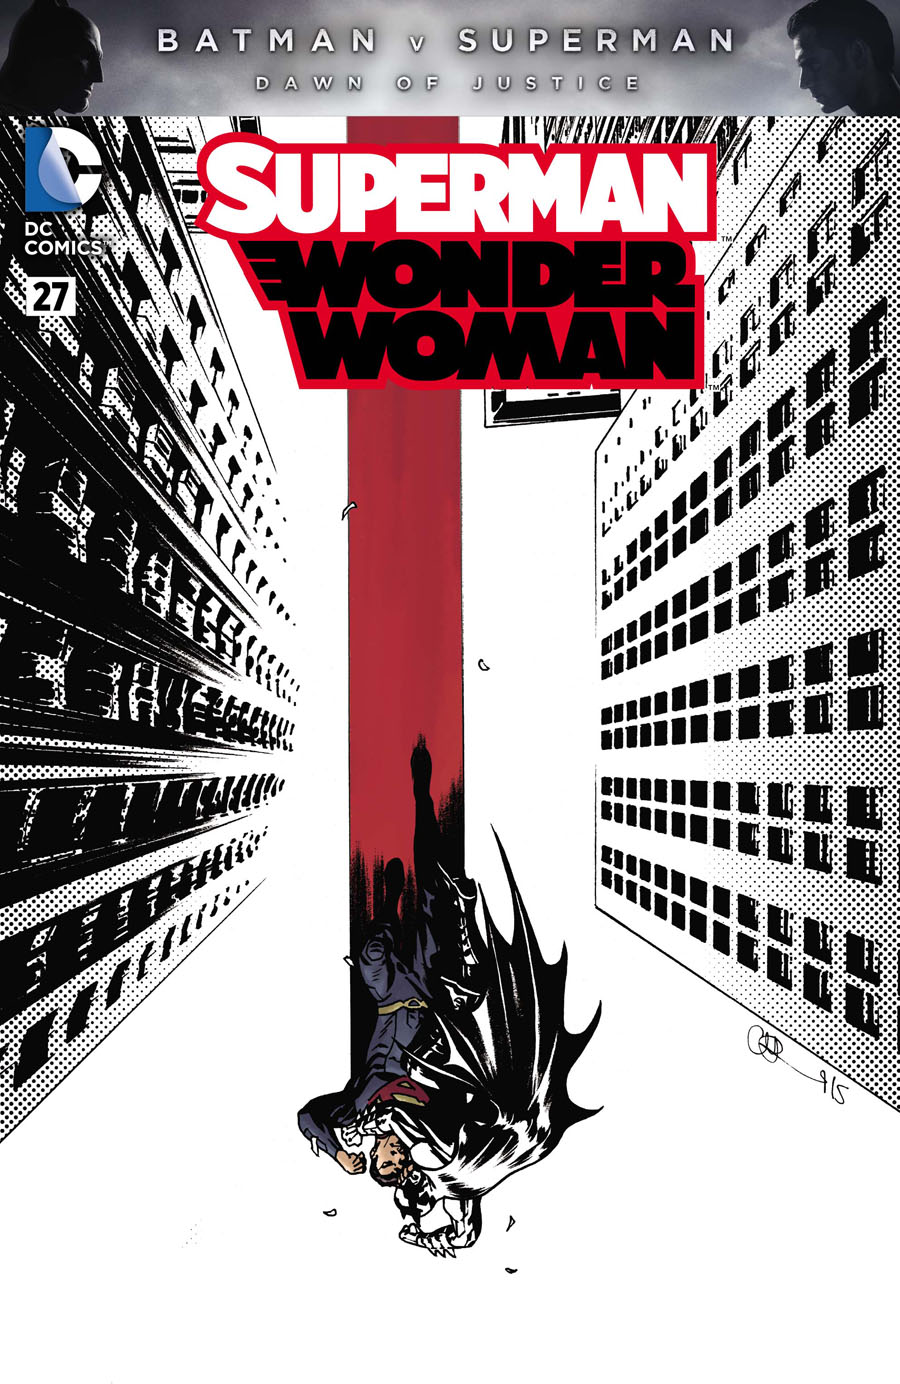 Superman Wonder Woman #27 Cover E Variant Charlie Adlard Batman v Superman Dawn Of Justice Character Cover Without Polybag